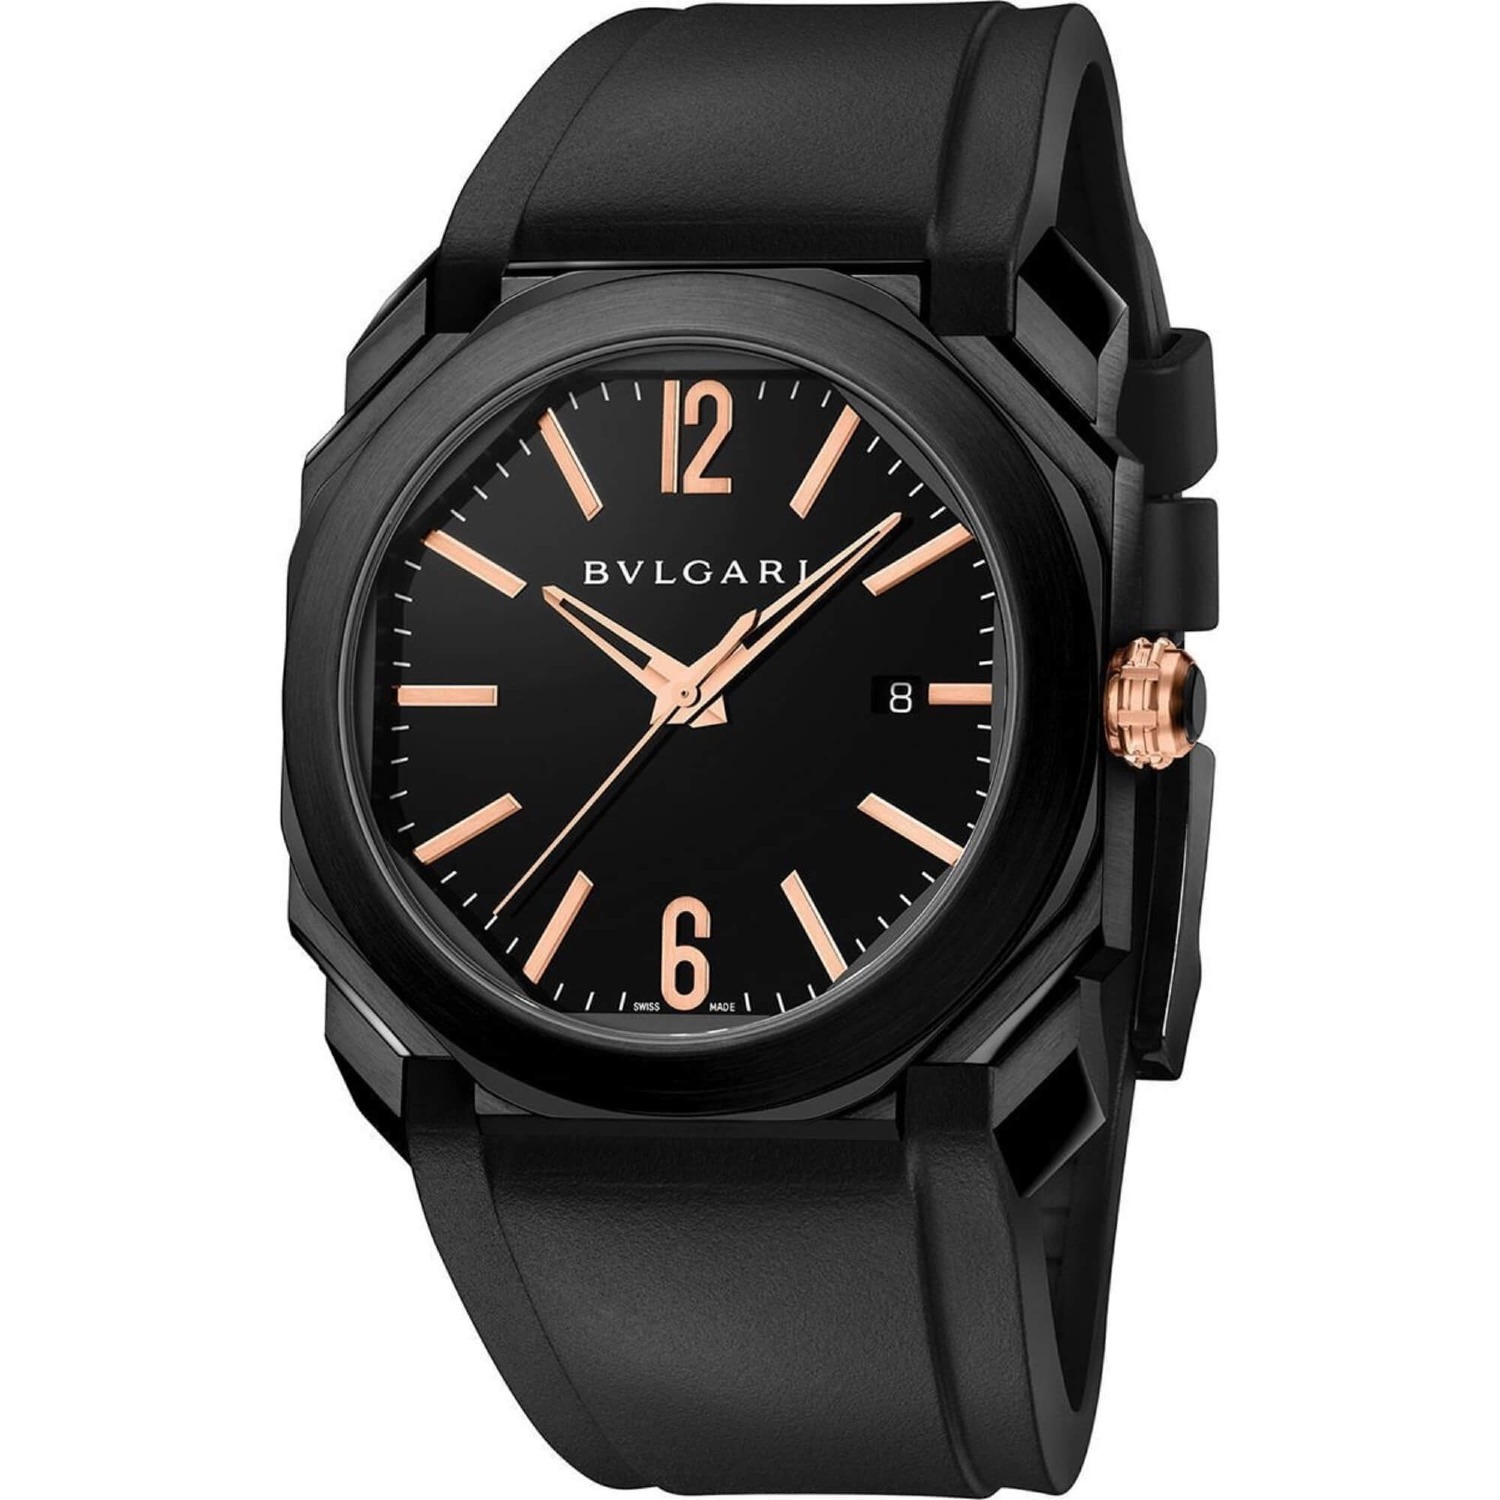 Bvlgari Men's Octo Swiss Automatic Watch Black Dial w/ Rubber Strap $4173.71 + Free S&H